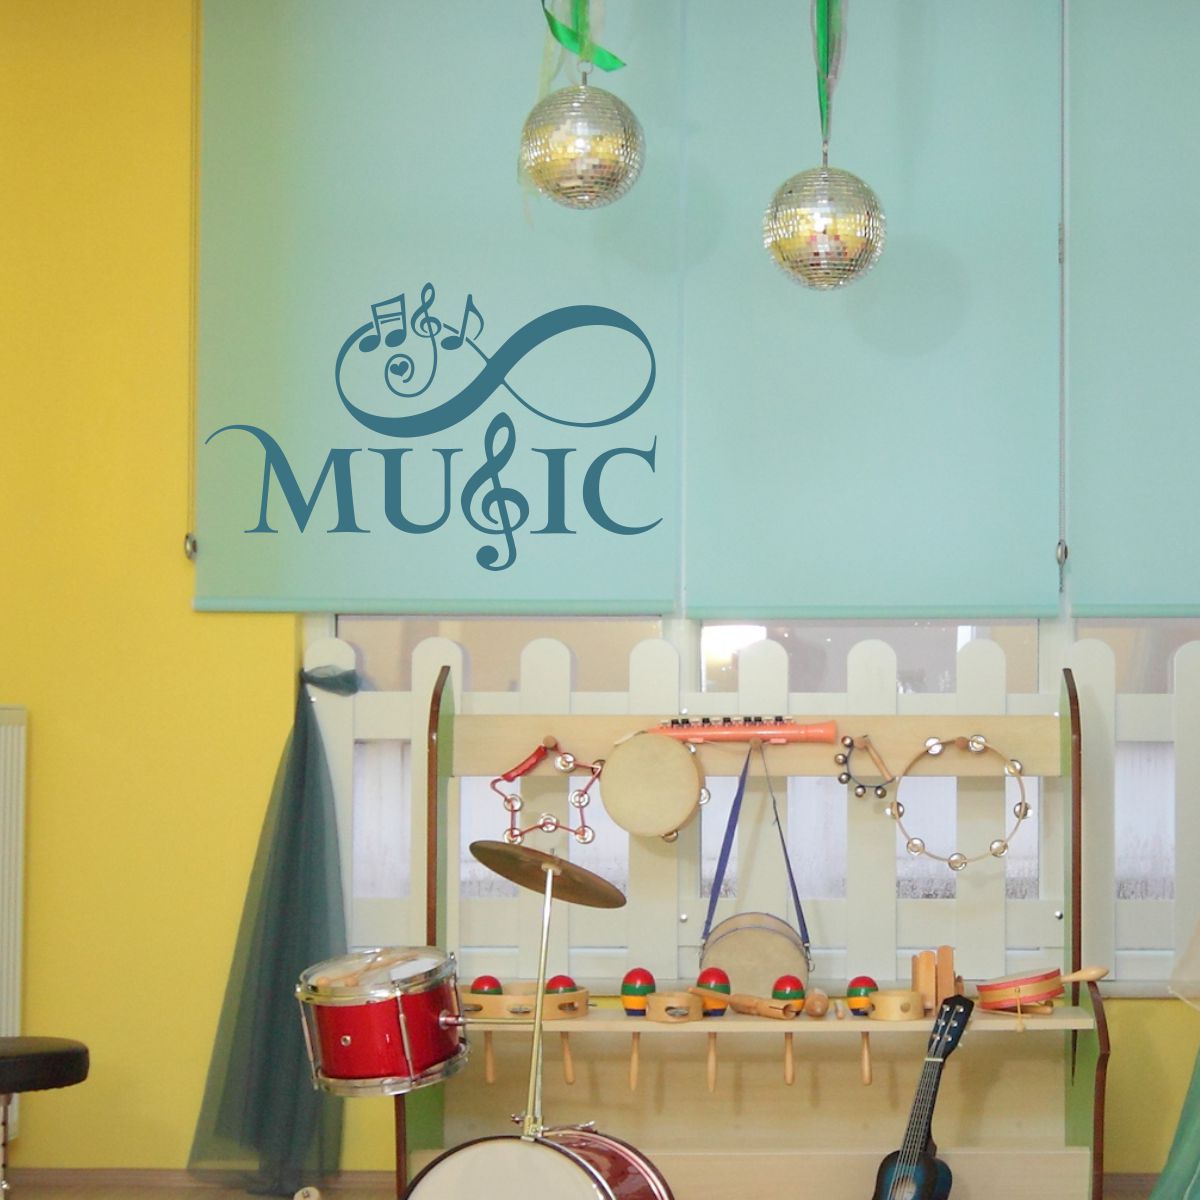 A playful music classroom utilizes a captivating musical instrument-themed decal [describe the decal] to direct young learners towards their designated area, sparking imagination and excitement for music education.